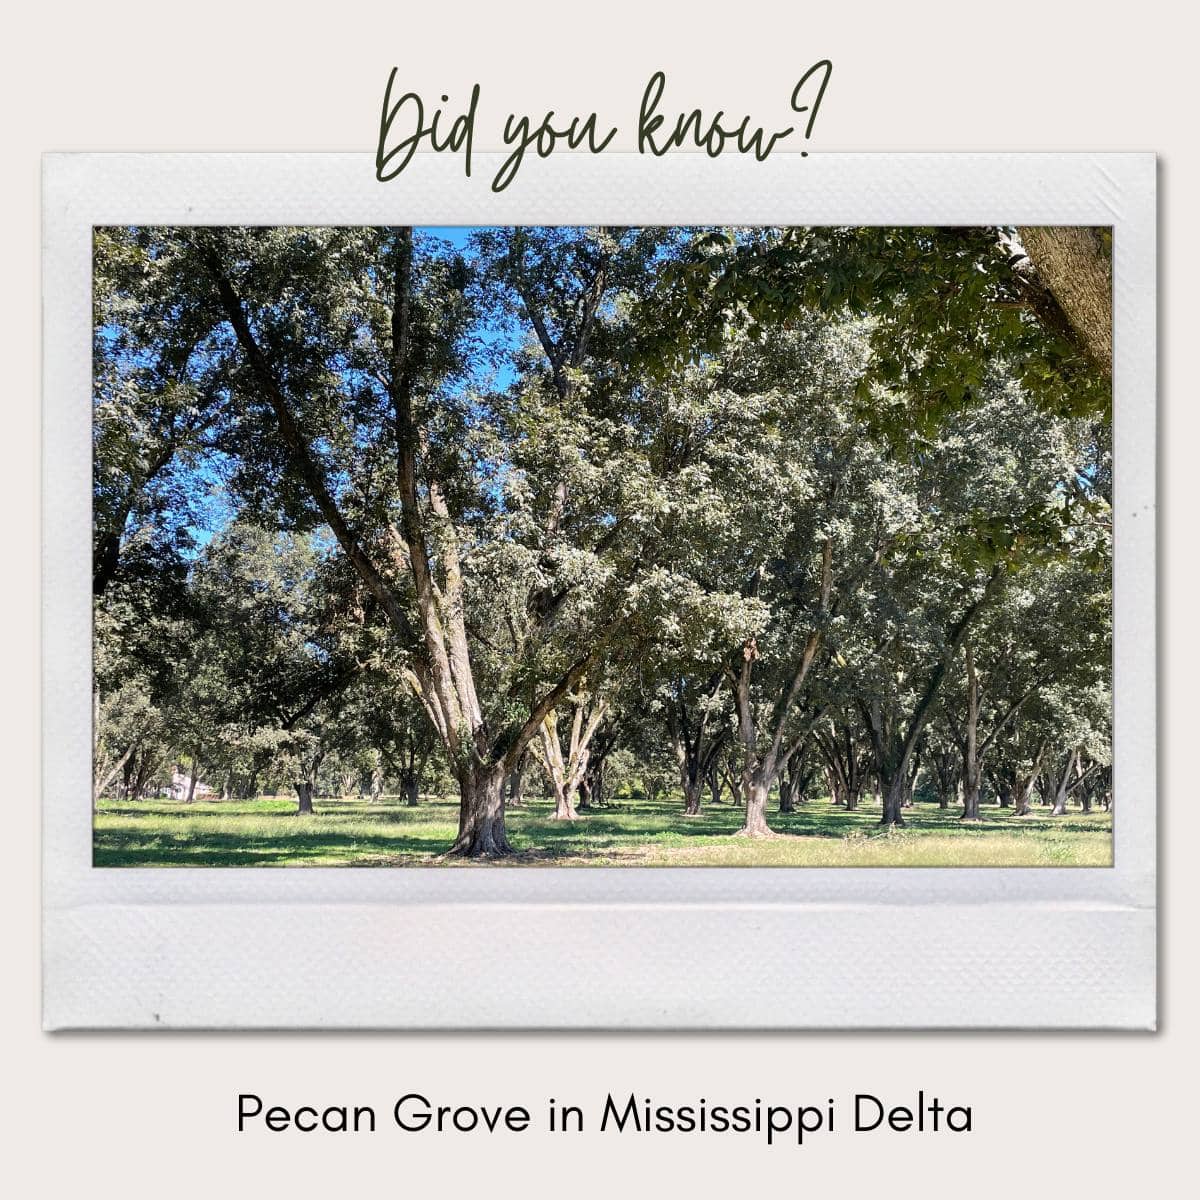 Pecan Groves in the Mississippi Delta